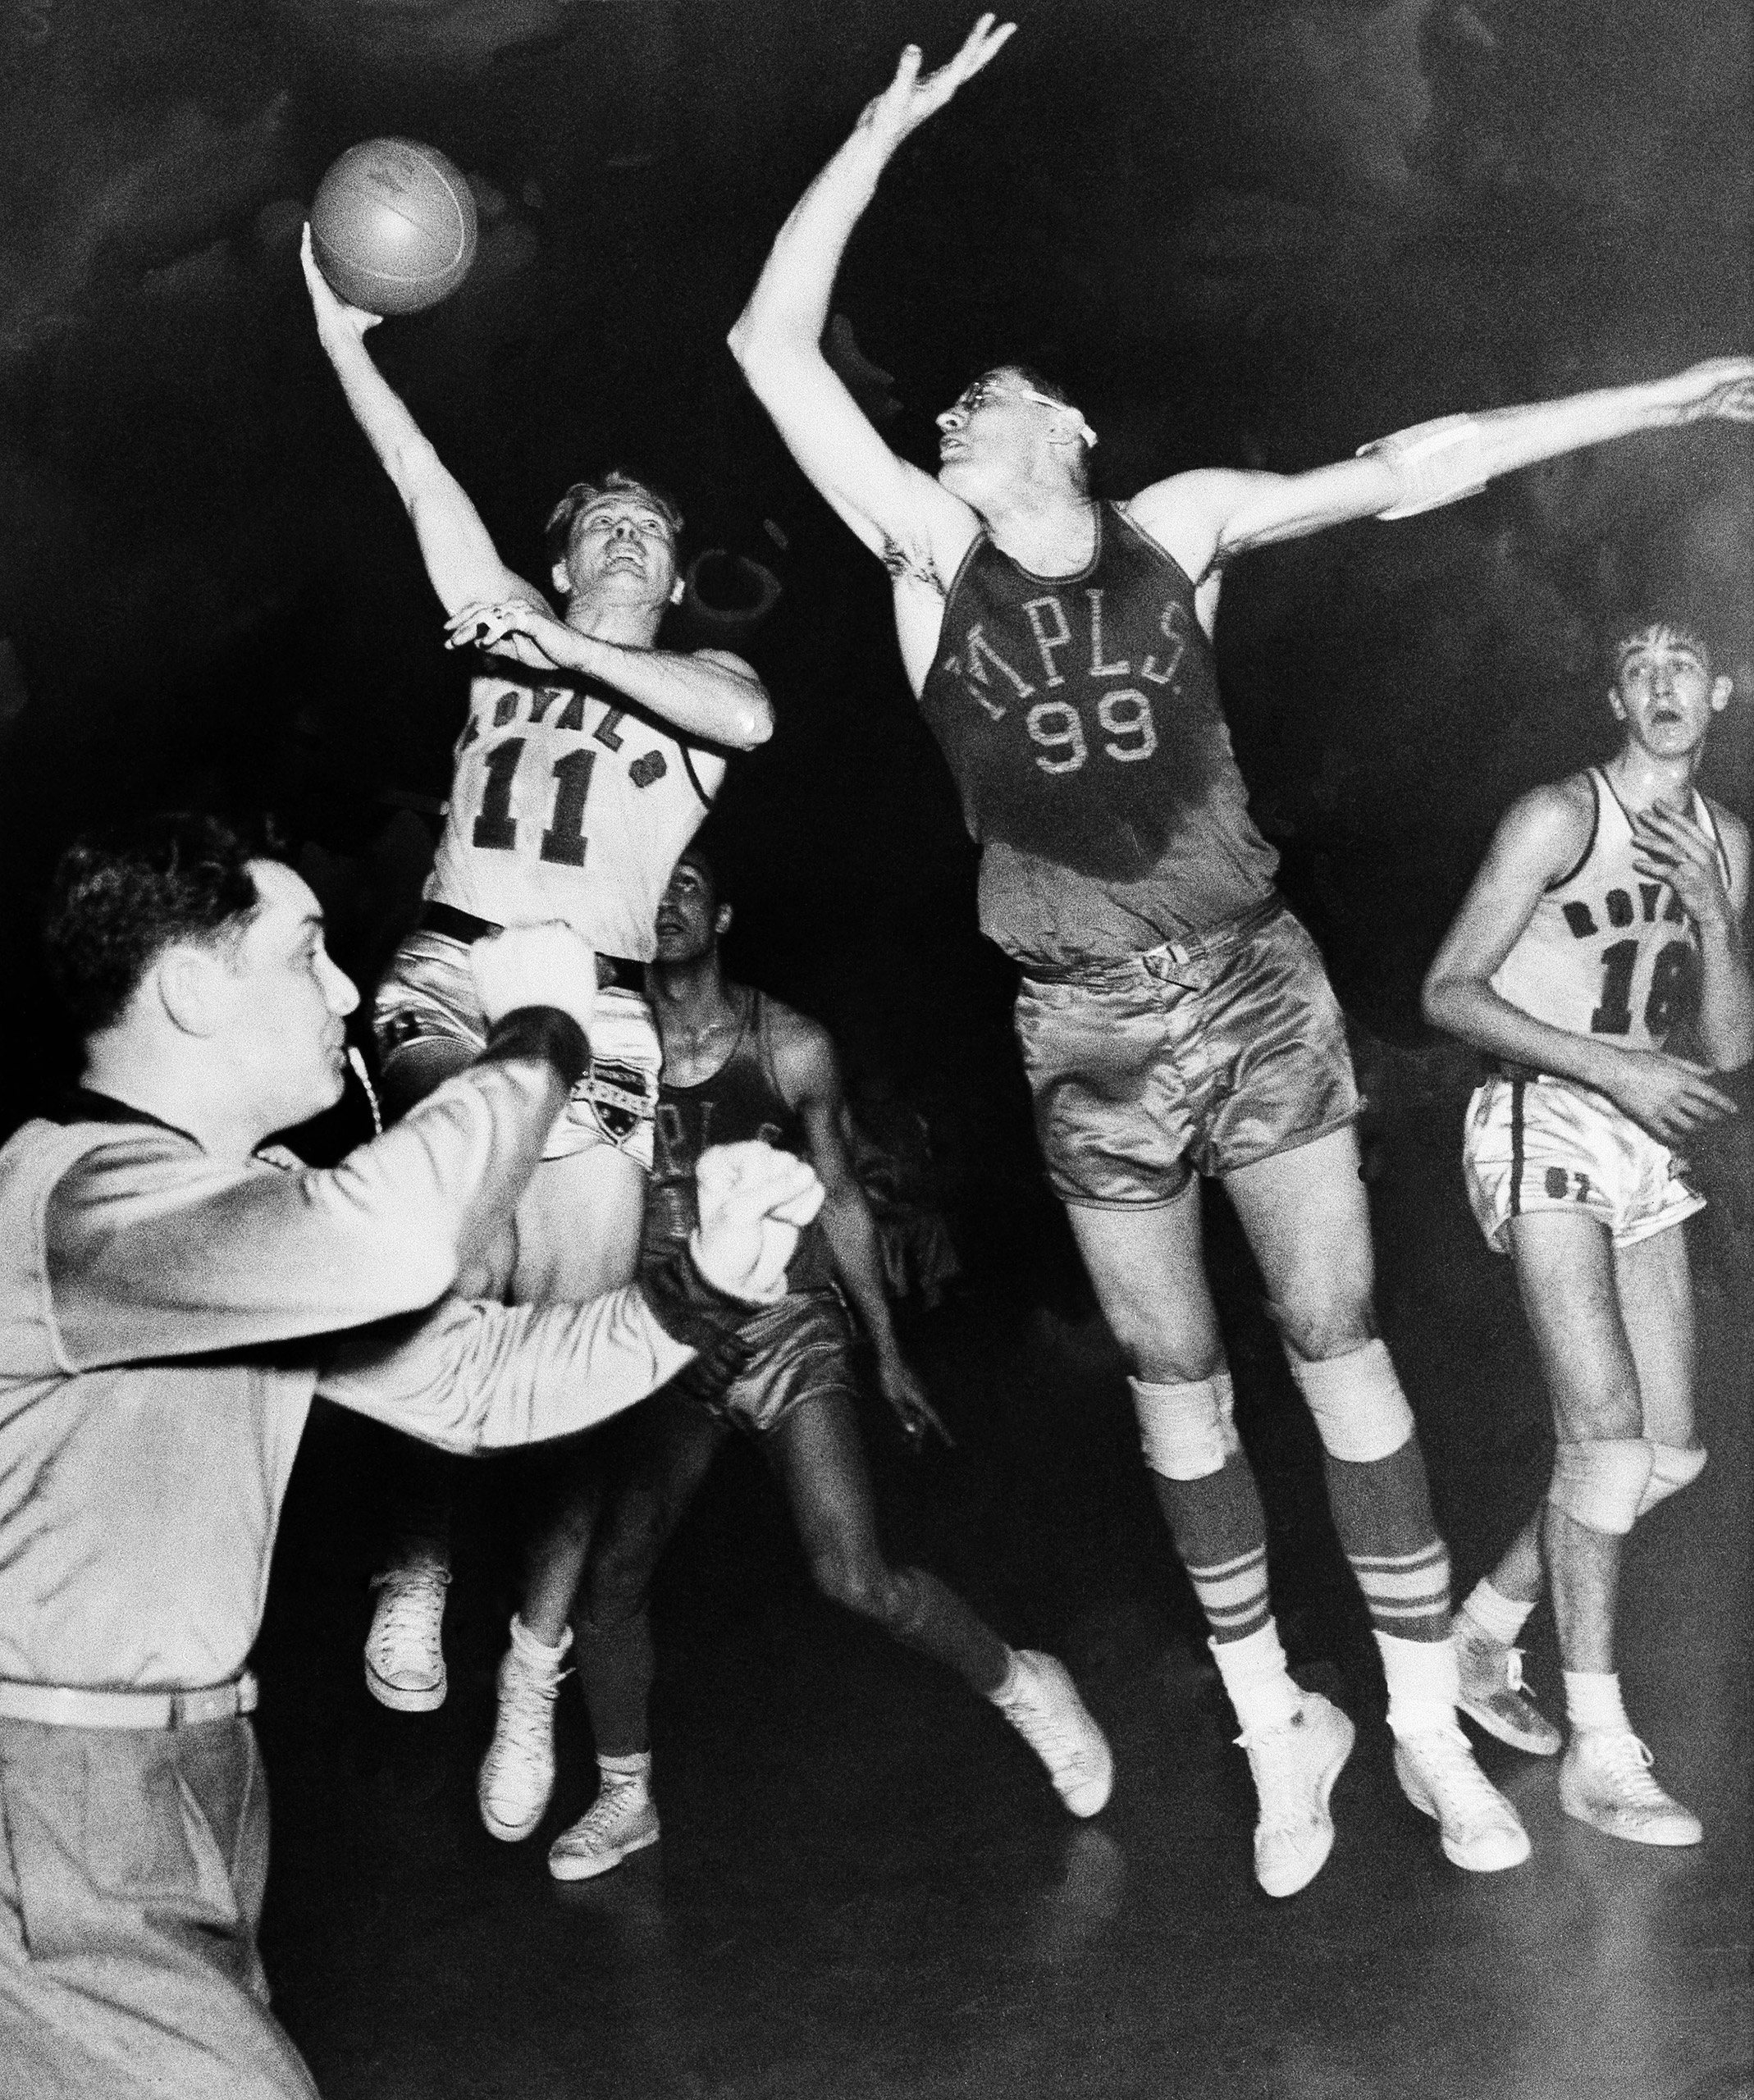 George Mikan (99), star Minneapolis Lakers center, breaks up a shot by Bob Davies, Rochester Royals guard (11) in the decisive game of the National Basketball Association's Western Division playoffs, April 4, 1951 in Rochester, N.Y. Rochester, won, 80-75.